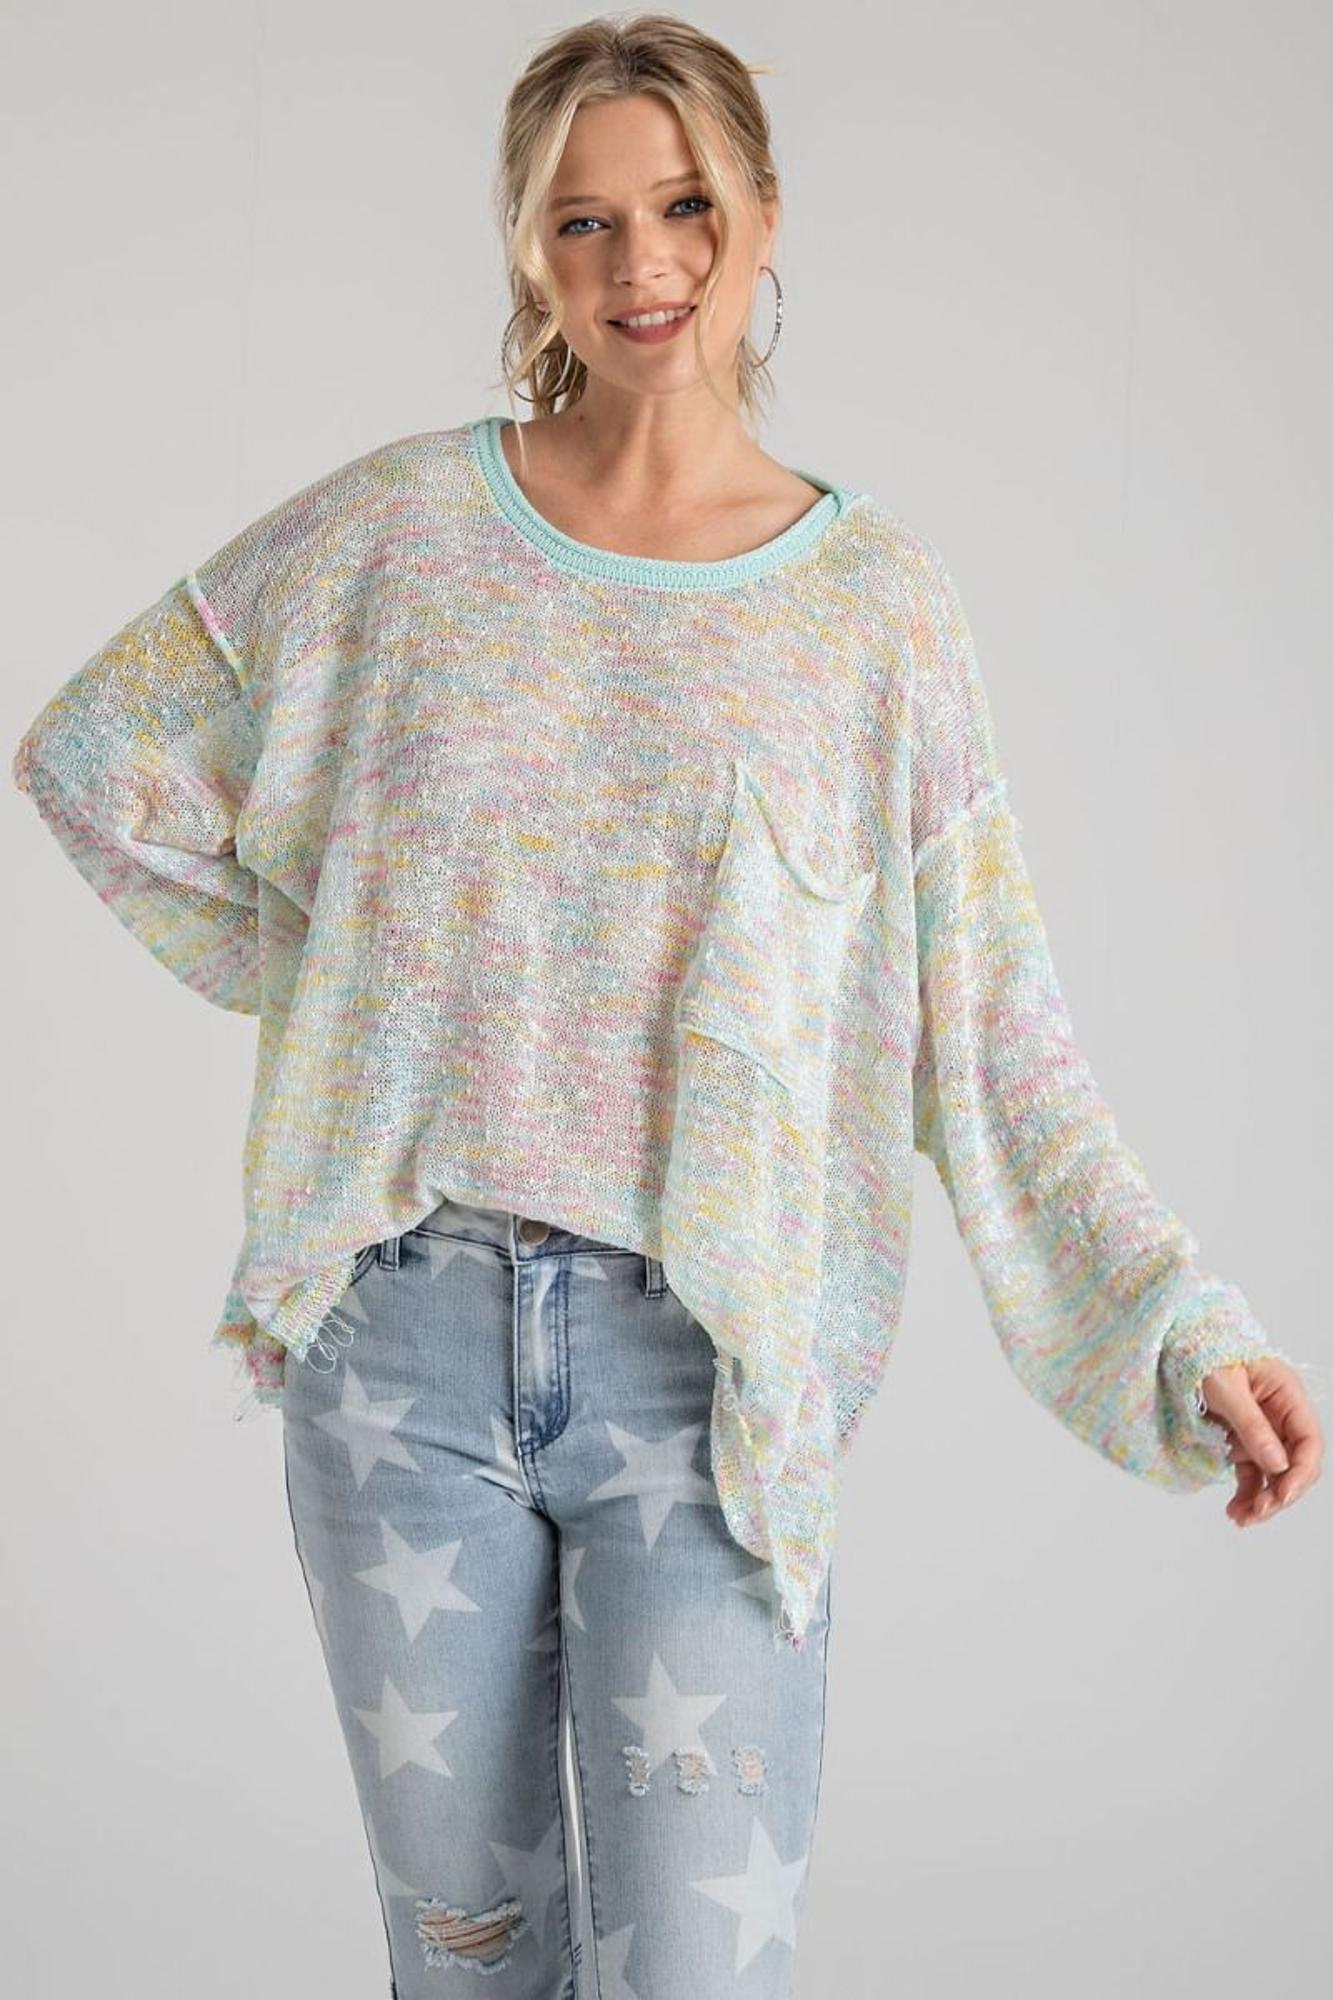 Full Of Color Light Knit Sweater